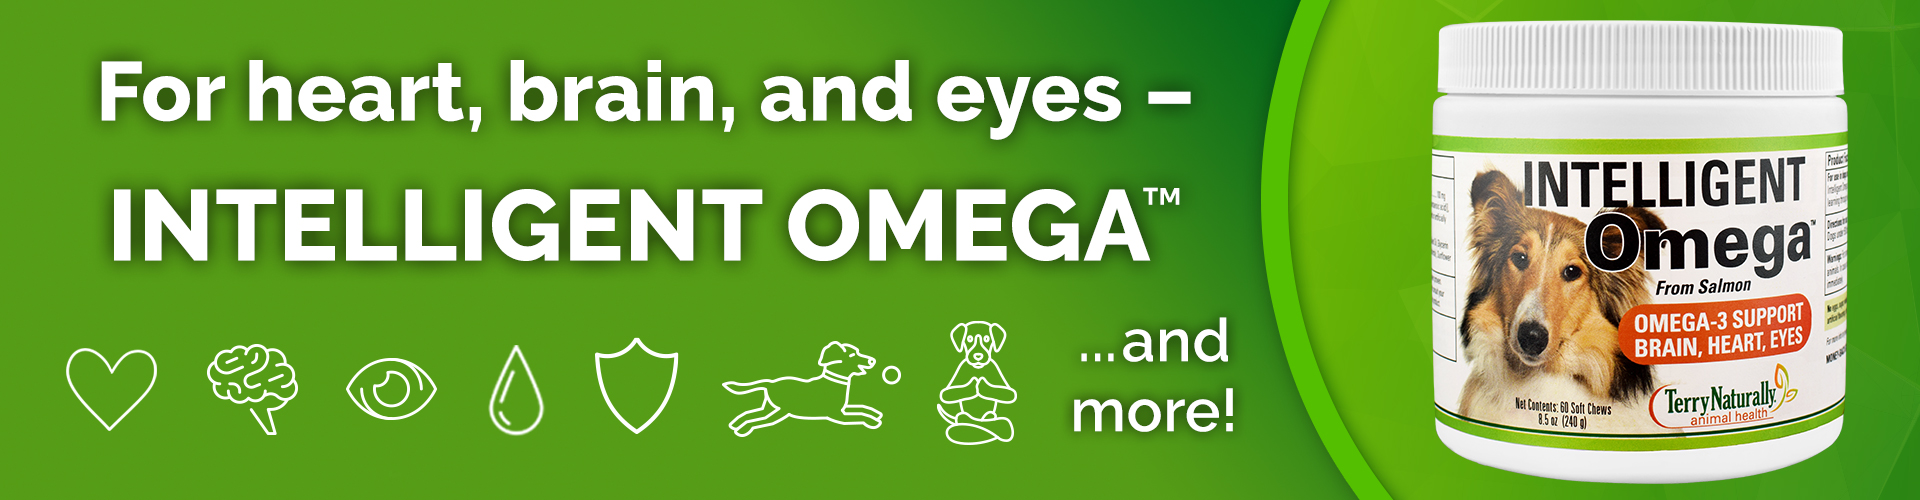 For heart, brain, and eyes — INTELLIGENT OMEGA™